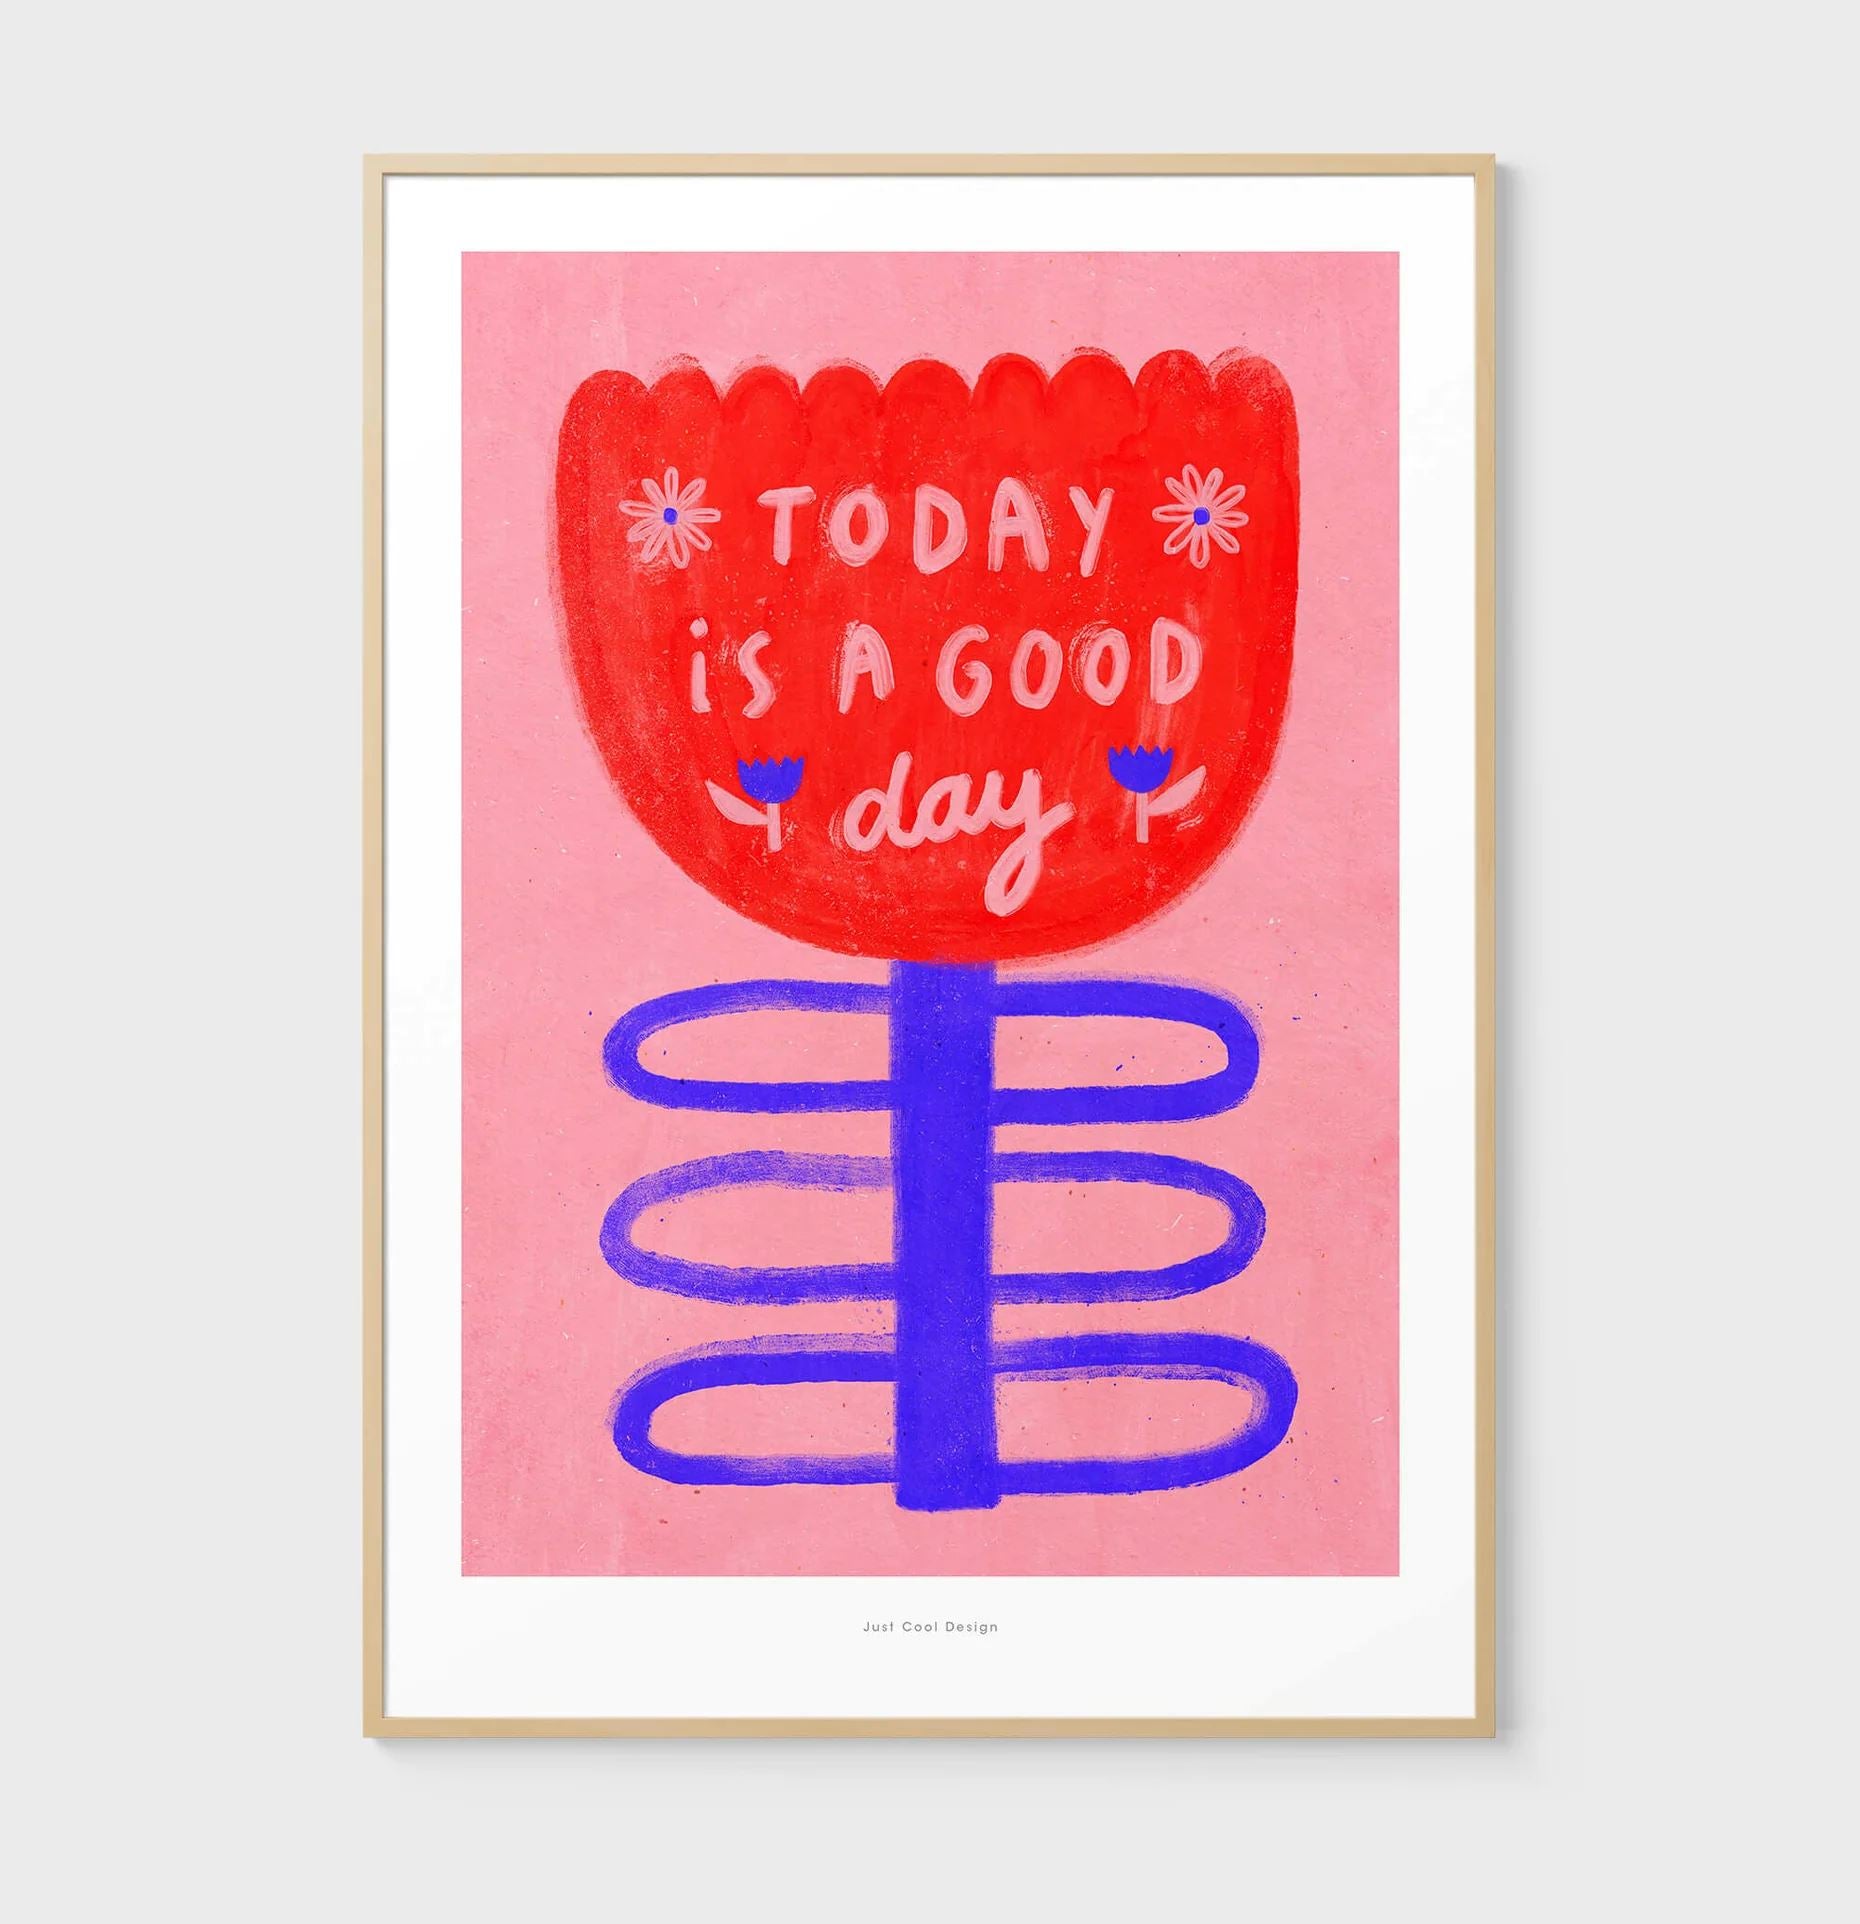 Poster "Today is a good day" Poster Just Cool Design 